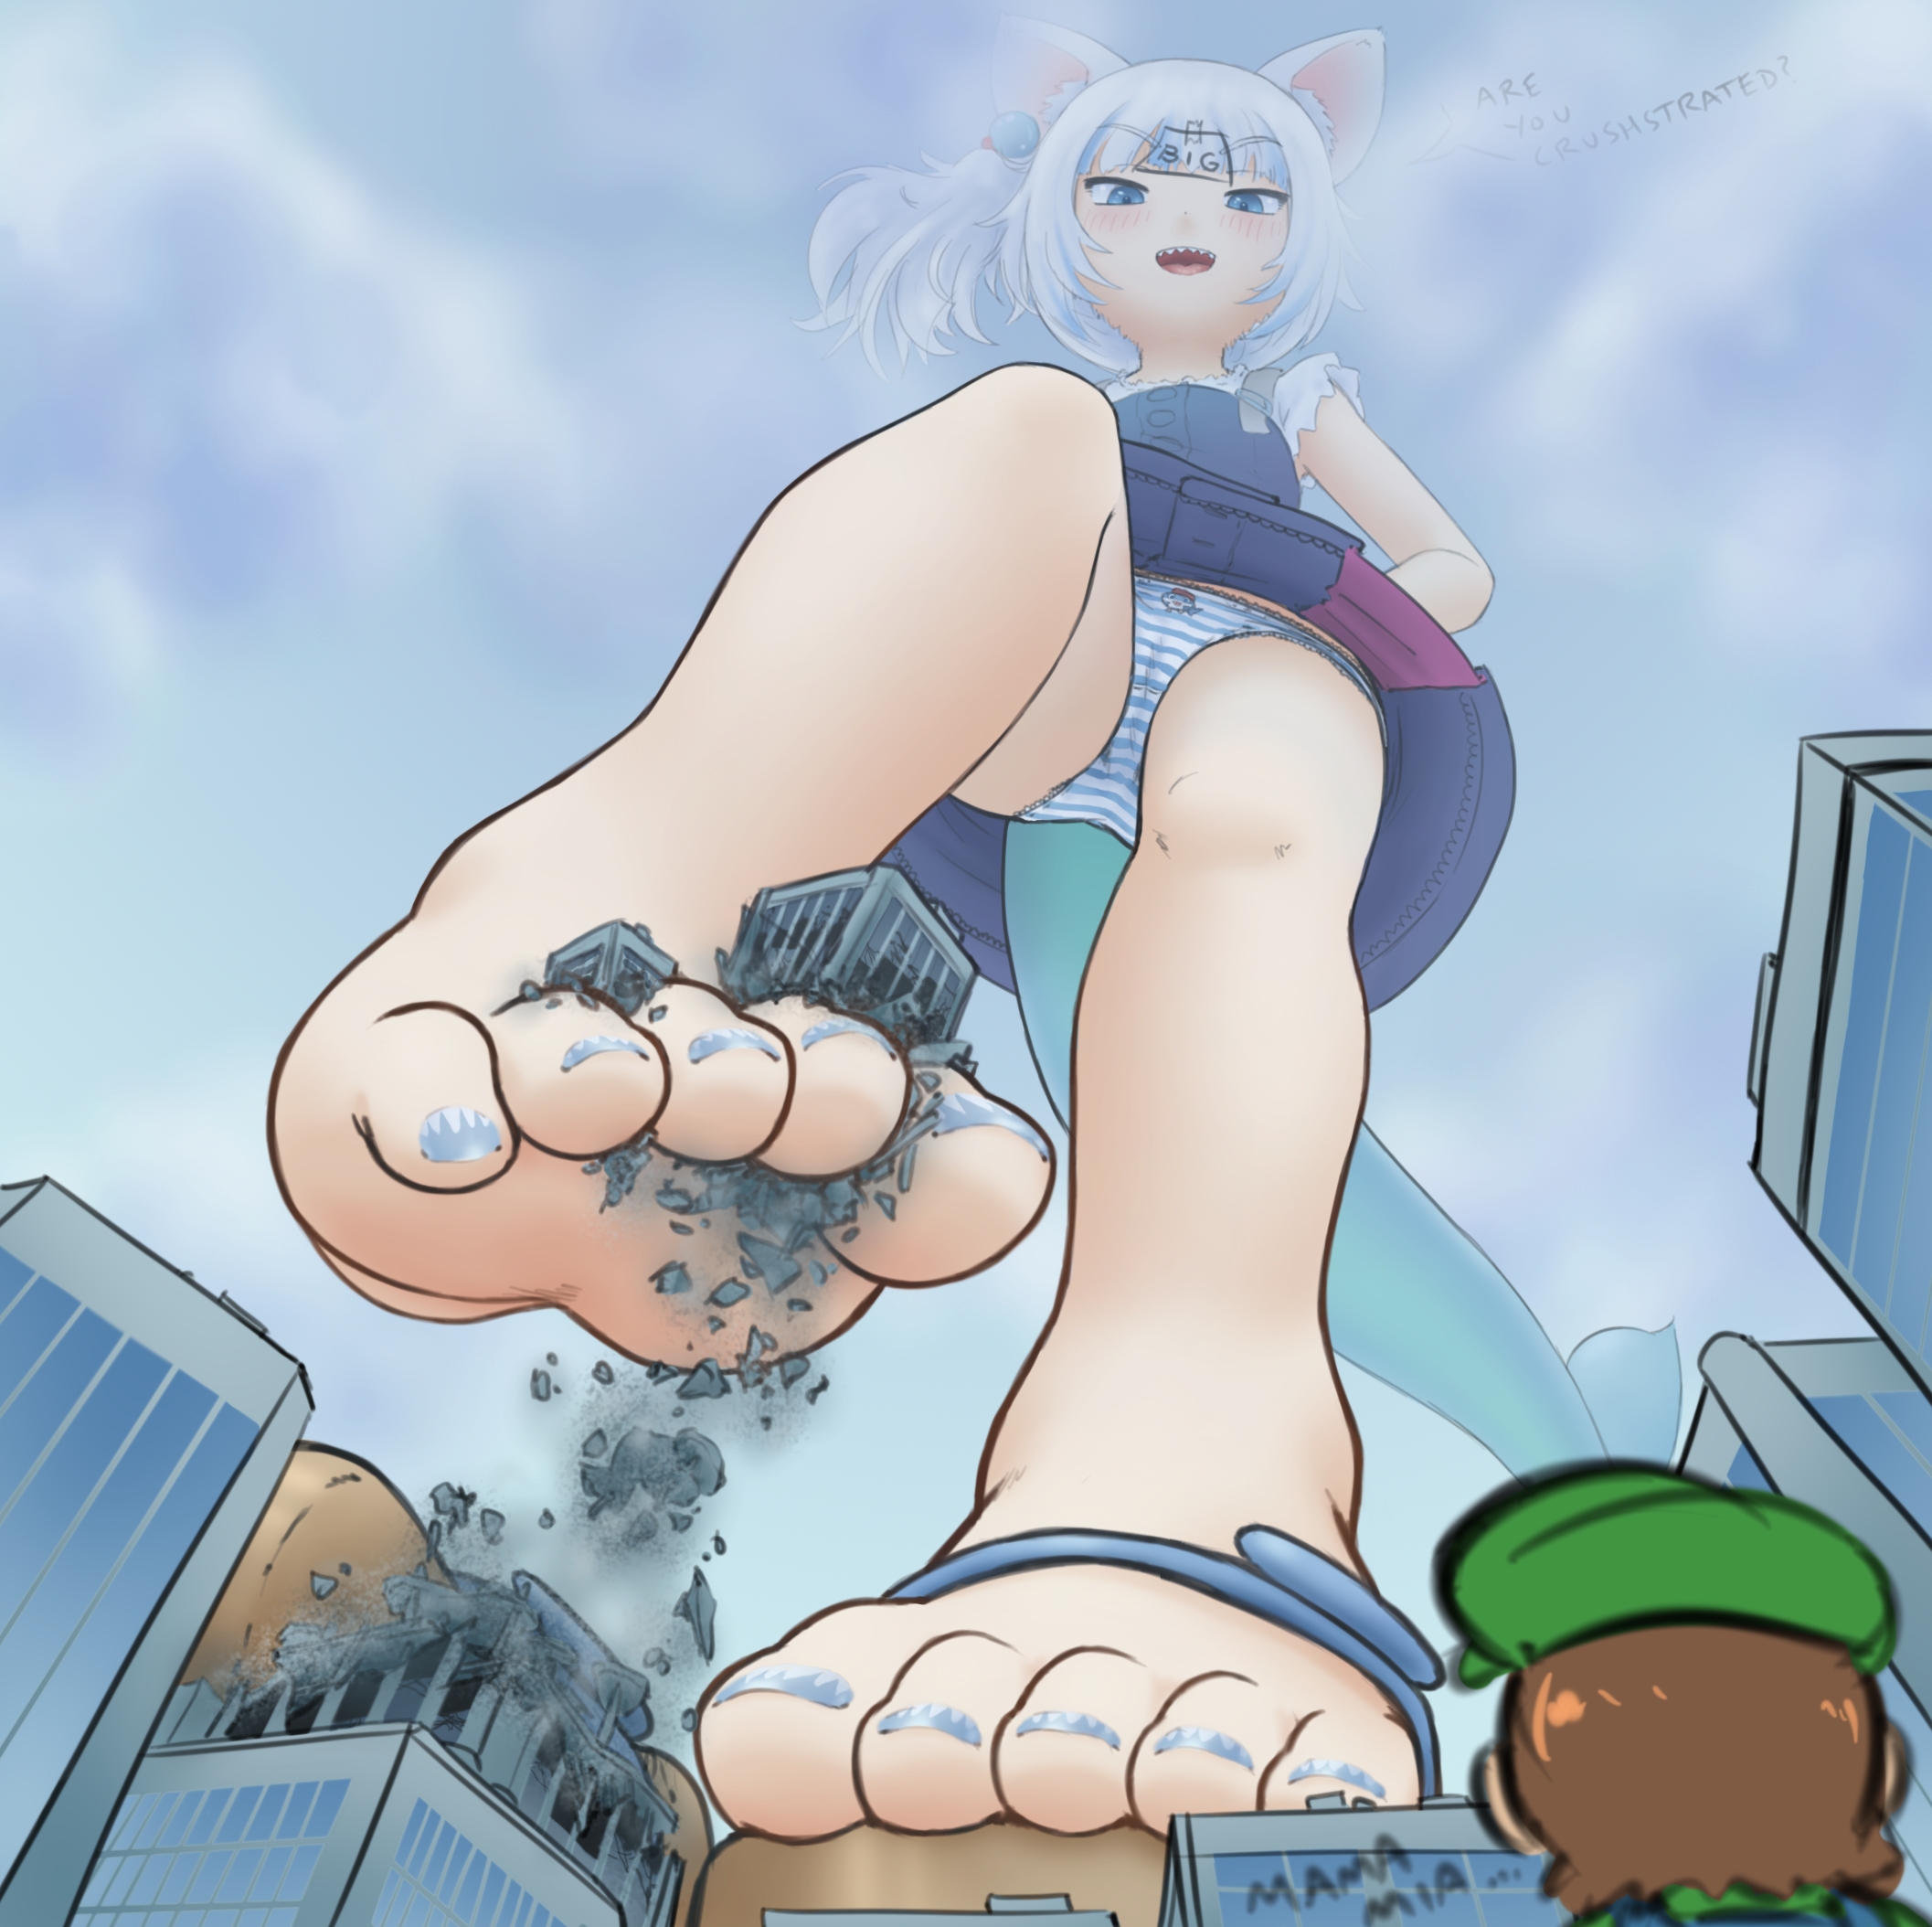 i dont get why giantess artists all want to smash buildings and stuff. why ...